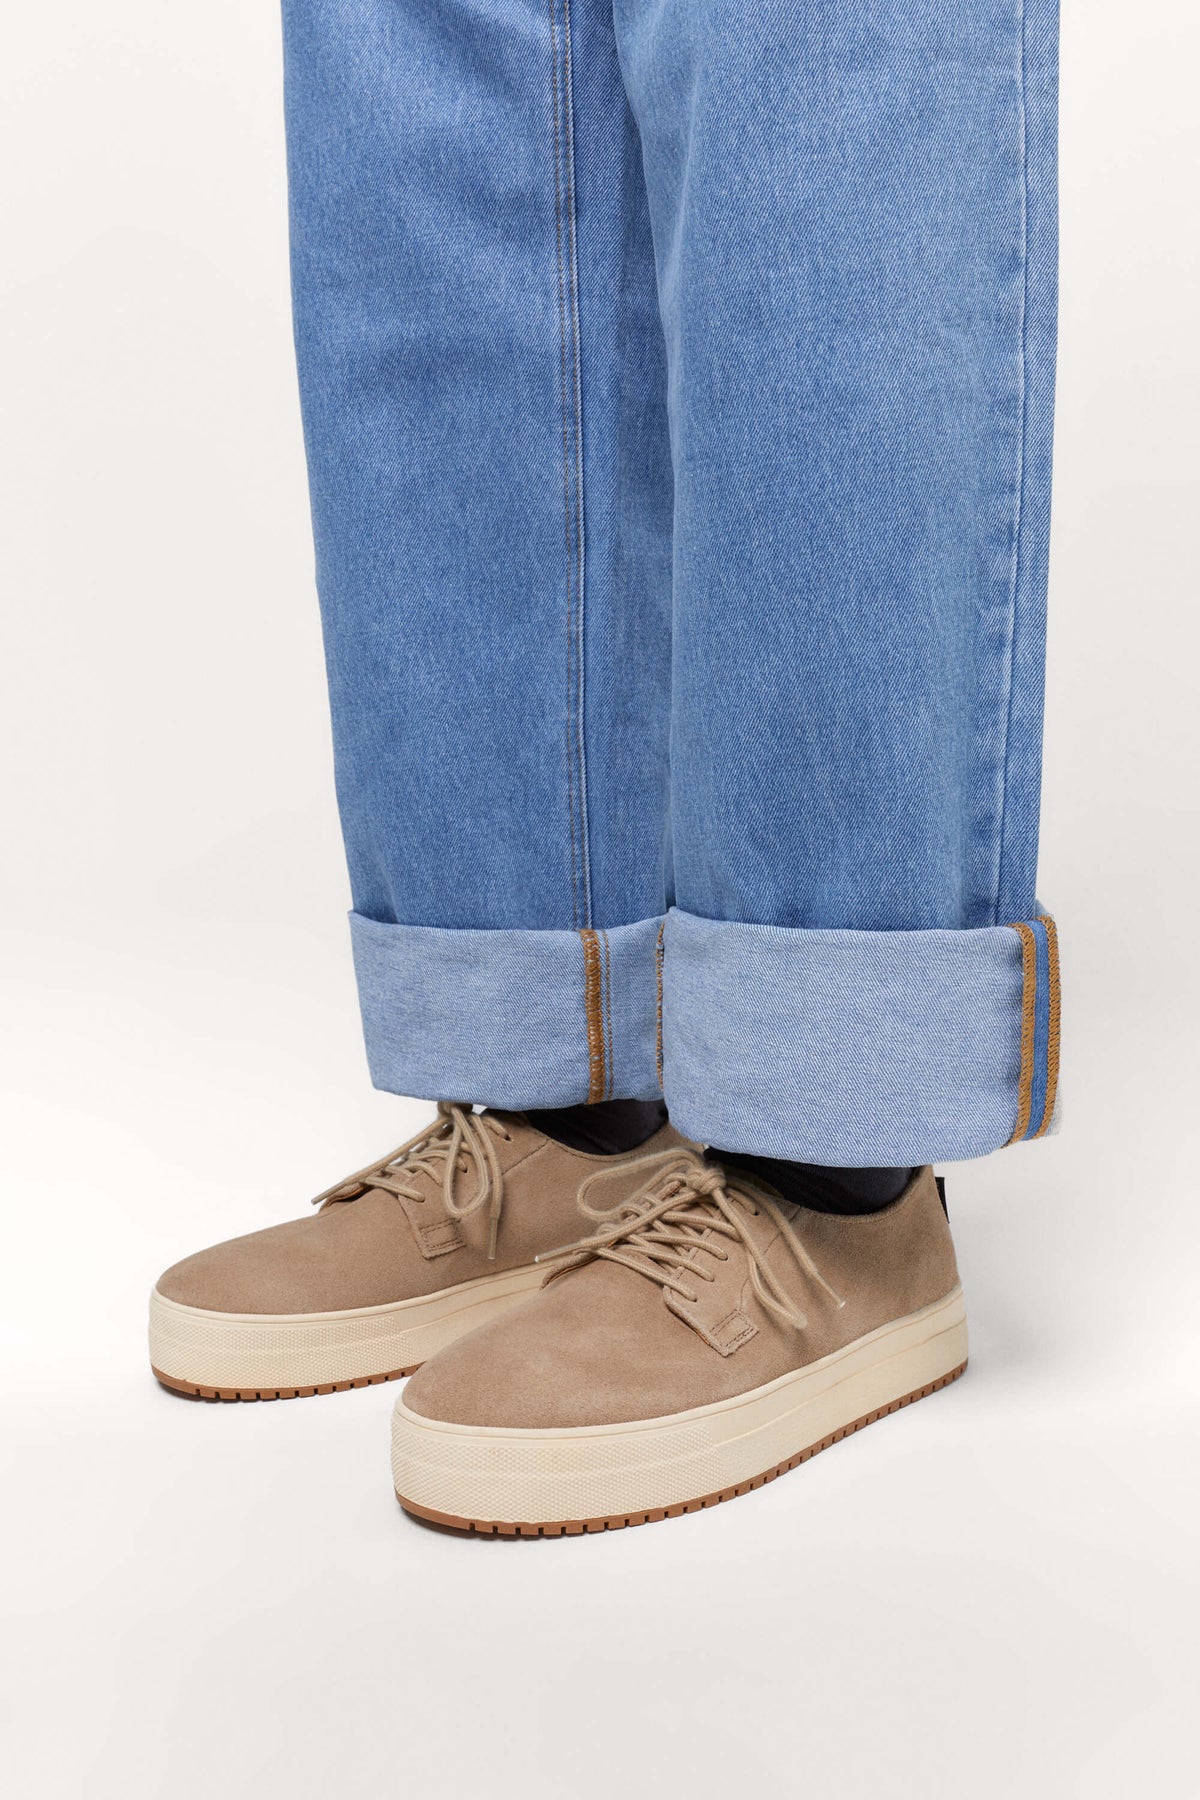 DUNNE SUEDE OYSTER